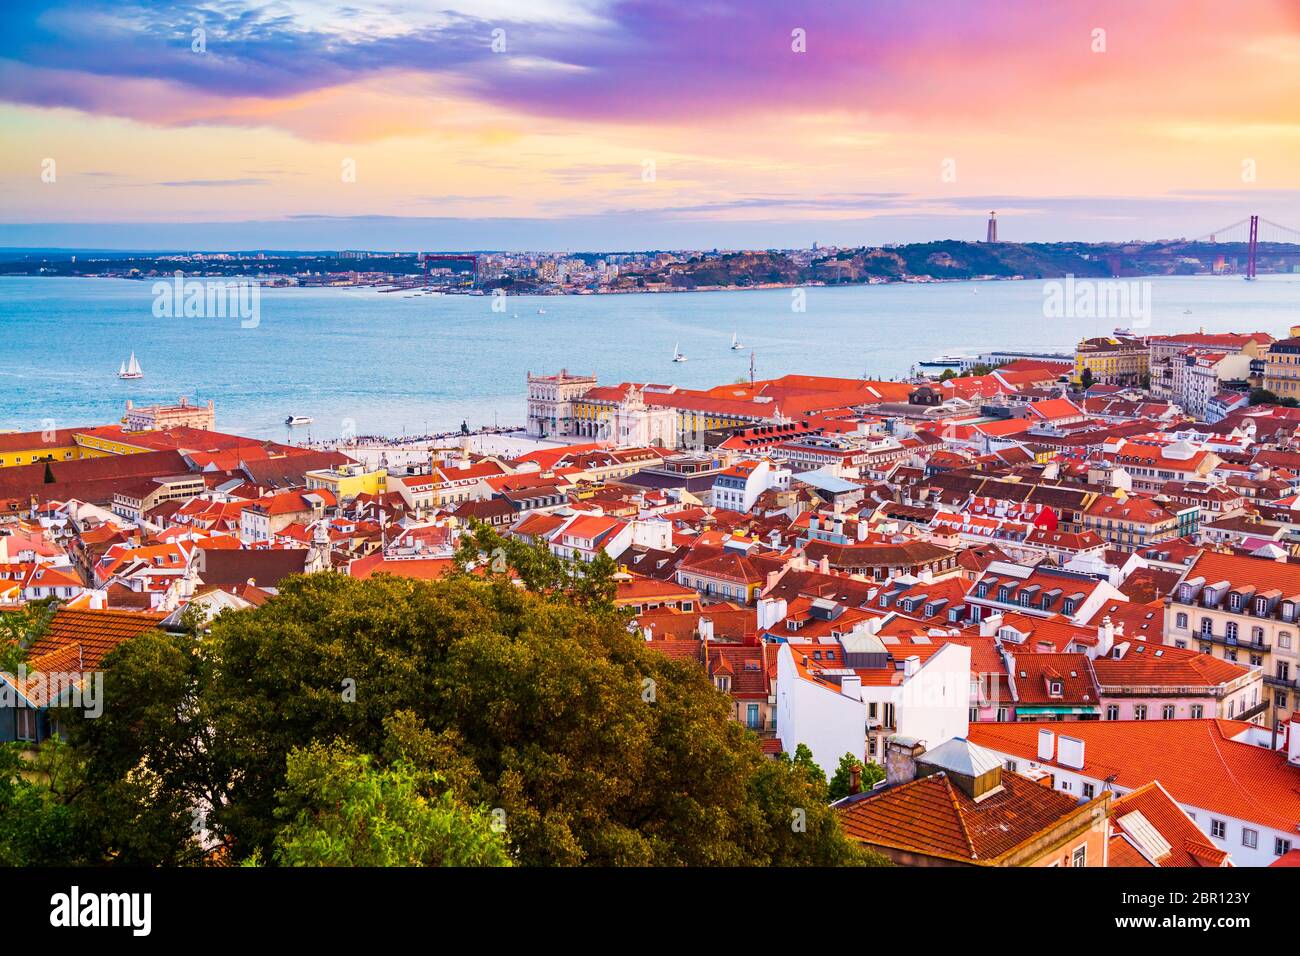 Beautiful panorama of old town Baixa district and Tagus River in Lisbon city during sunset, seen from Sao Jorge Castle hill, Portugal Stock Photo